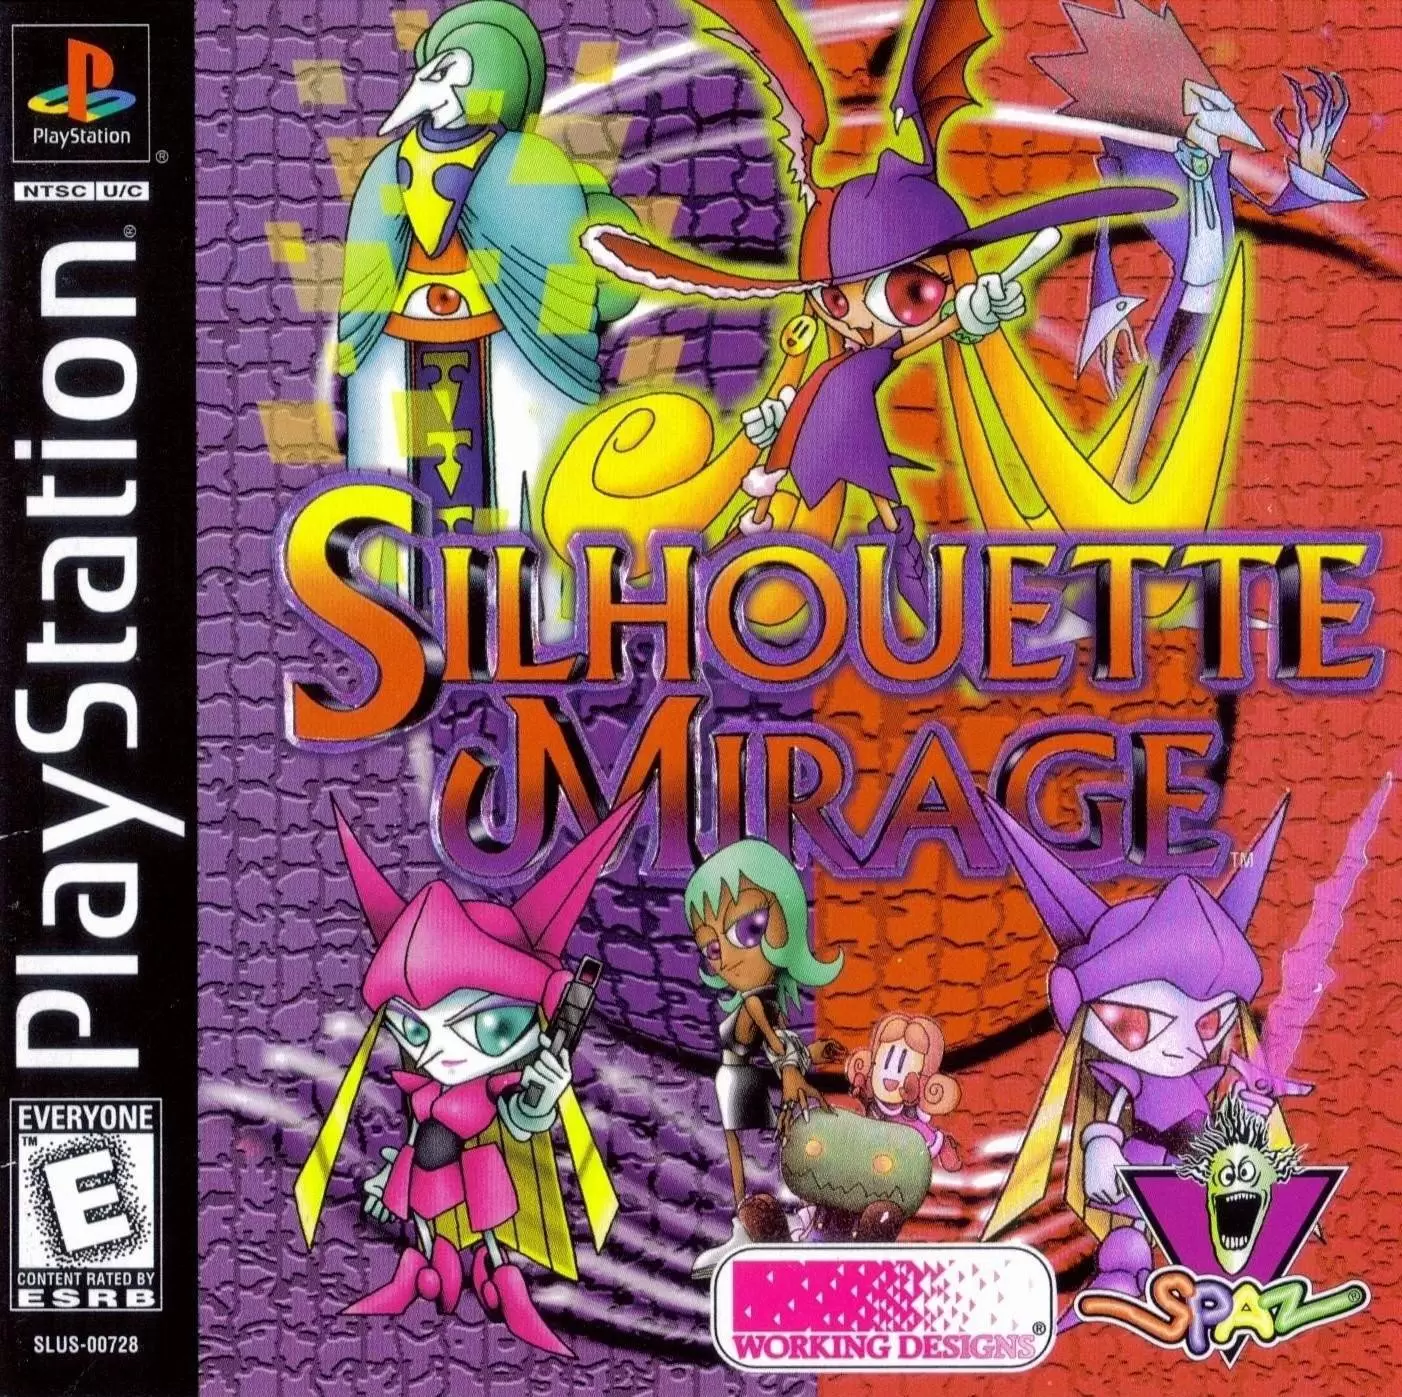 Jeux Playstation PS1 - Silhouette Mirage